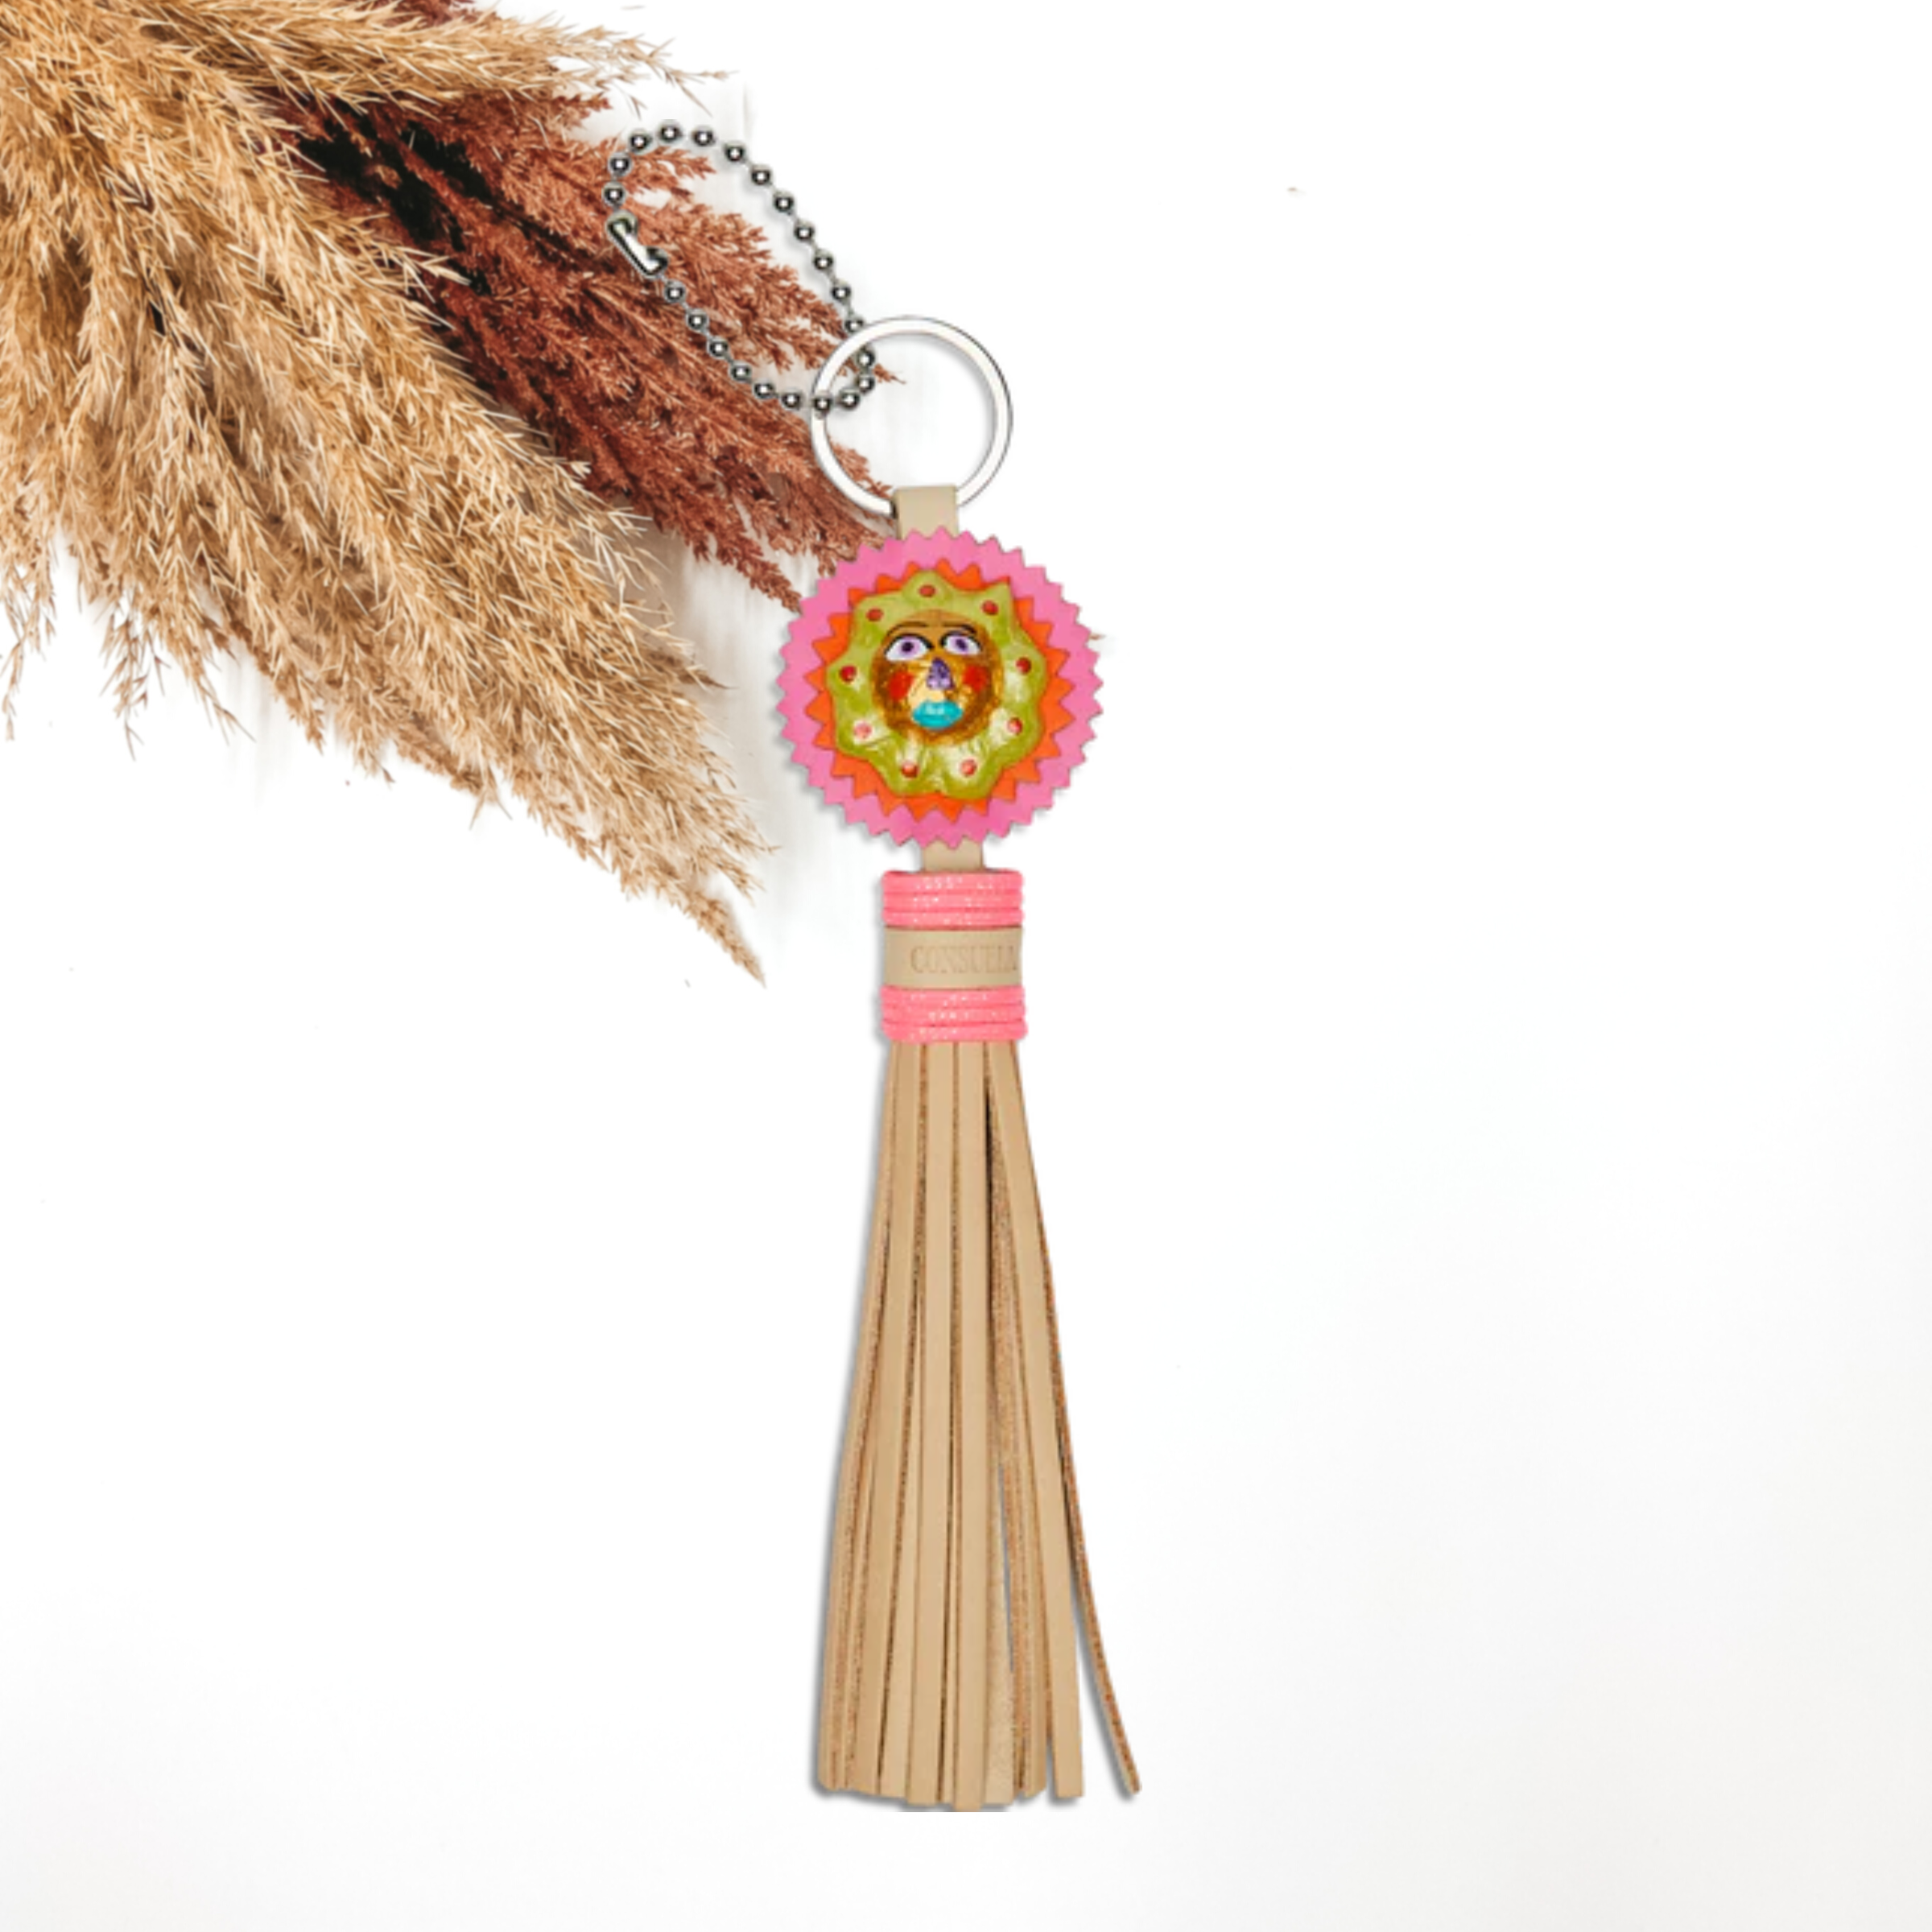 Silver key ring with a pink, circle charm and light tan tassels. The circle charm has a multicolored face in the center. This charm is pictured on a white background with pompous grass in the top right corner.  